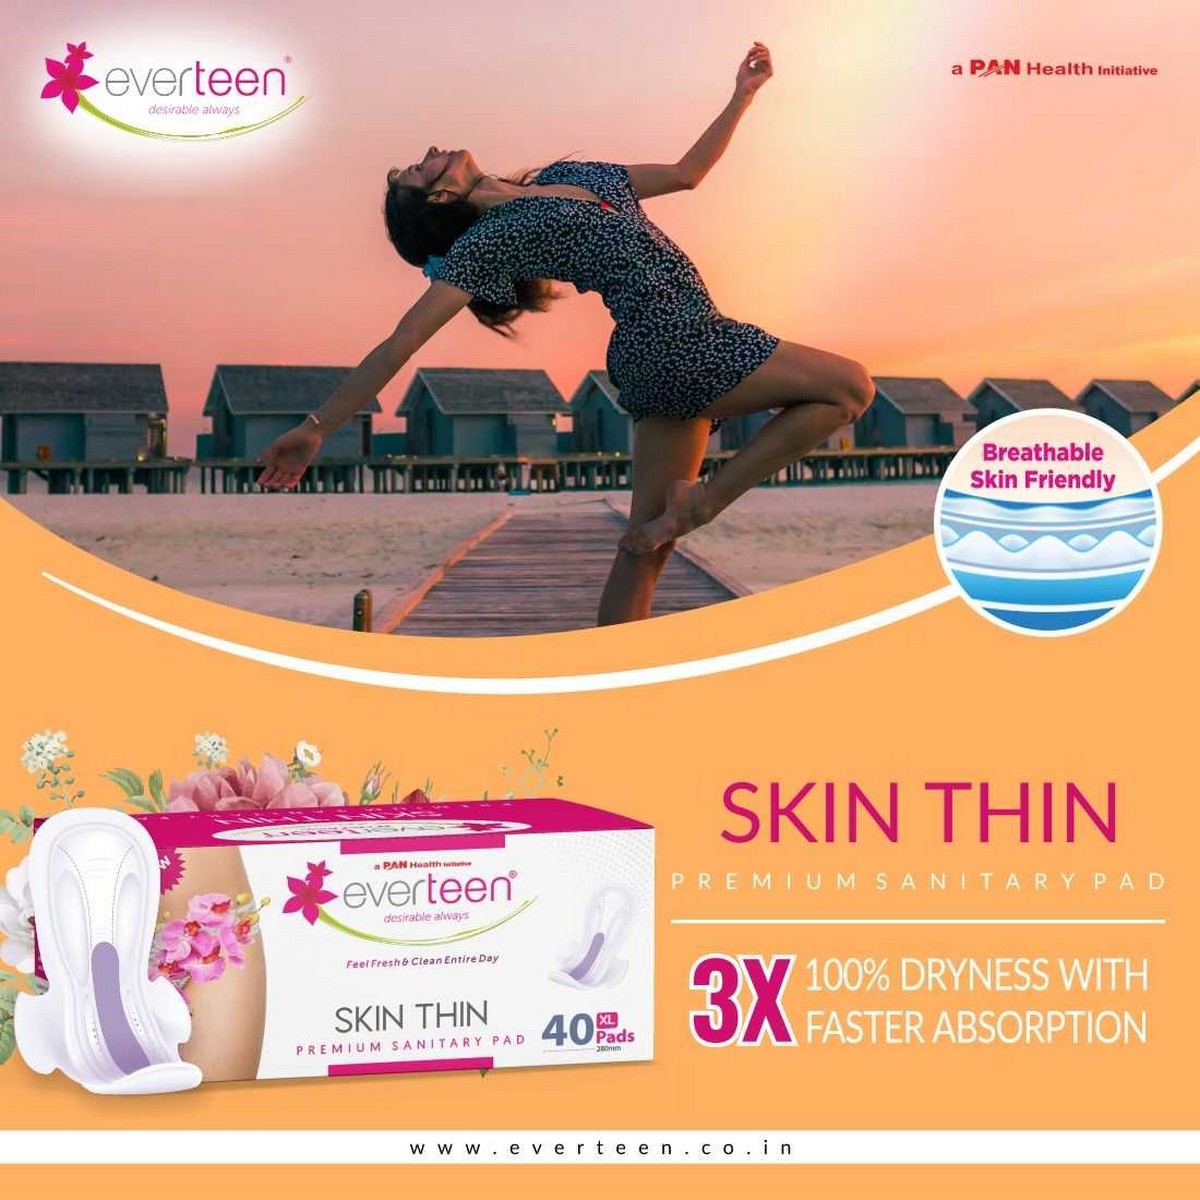 Everteen Skin Thin Premium XL Sanitary Pads 40Pieces  everteen SKIN THIN Premium XL Sanitary Pads for Protection During Periods in Women 1 Pack 40 Pads 280mm3